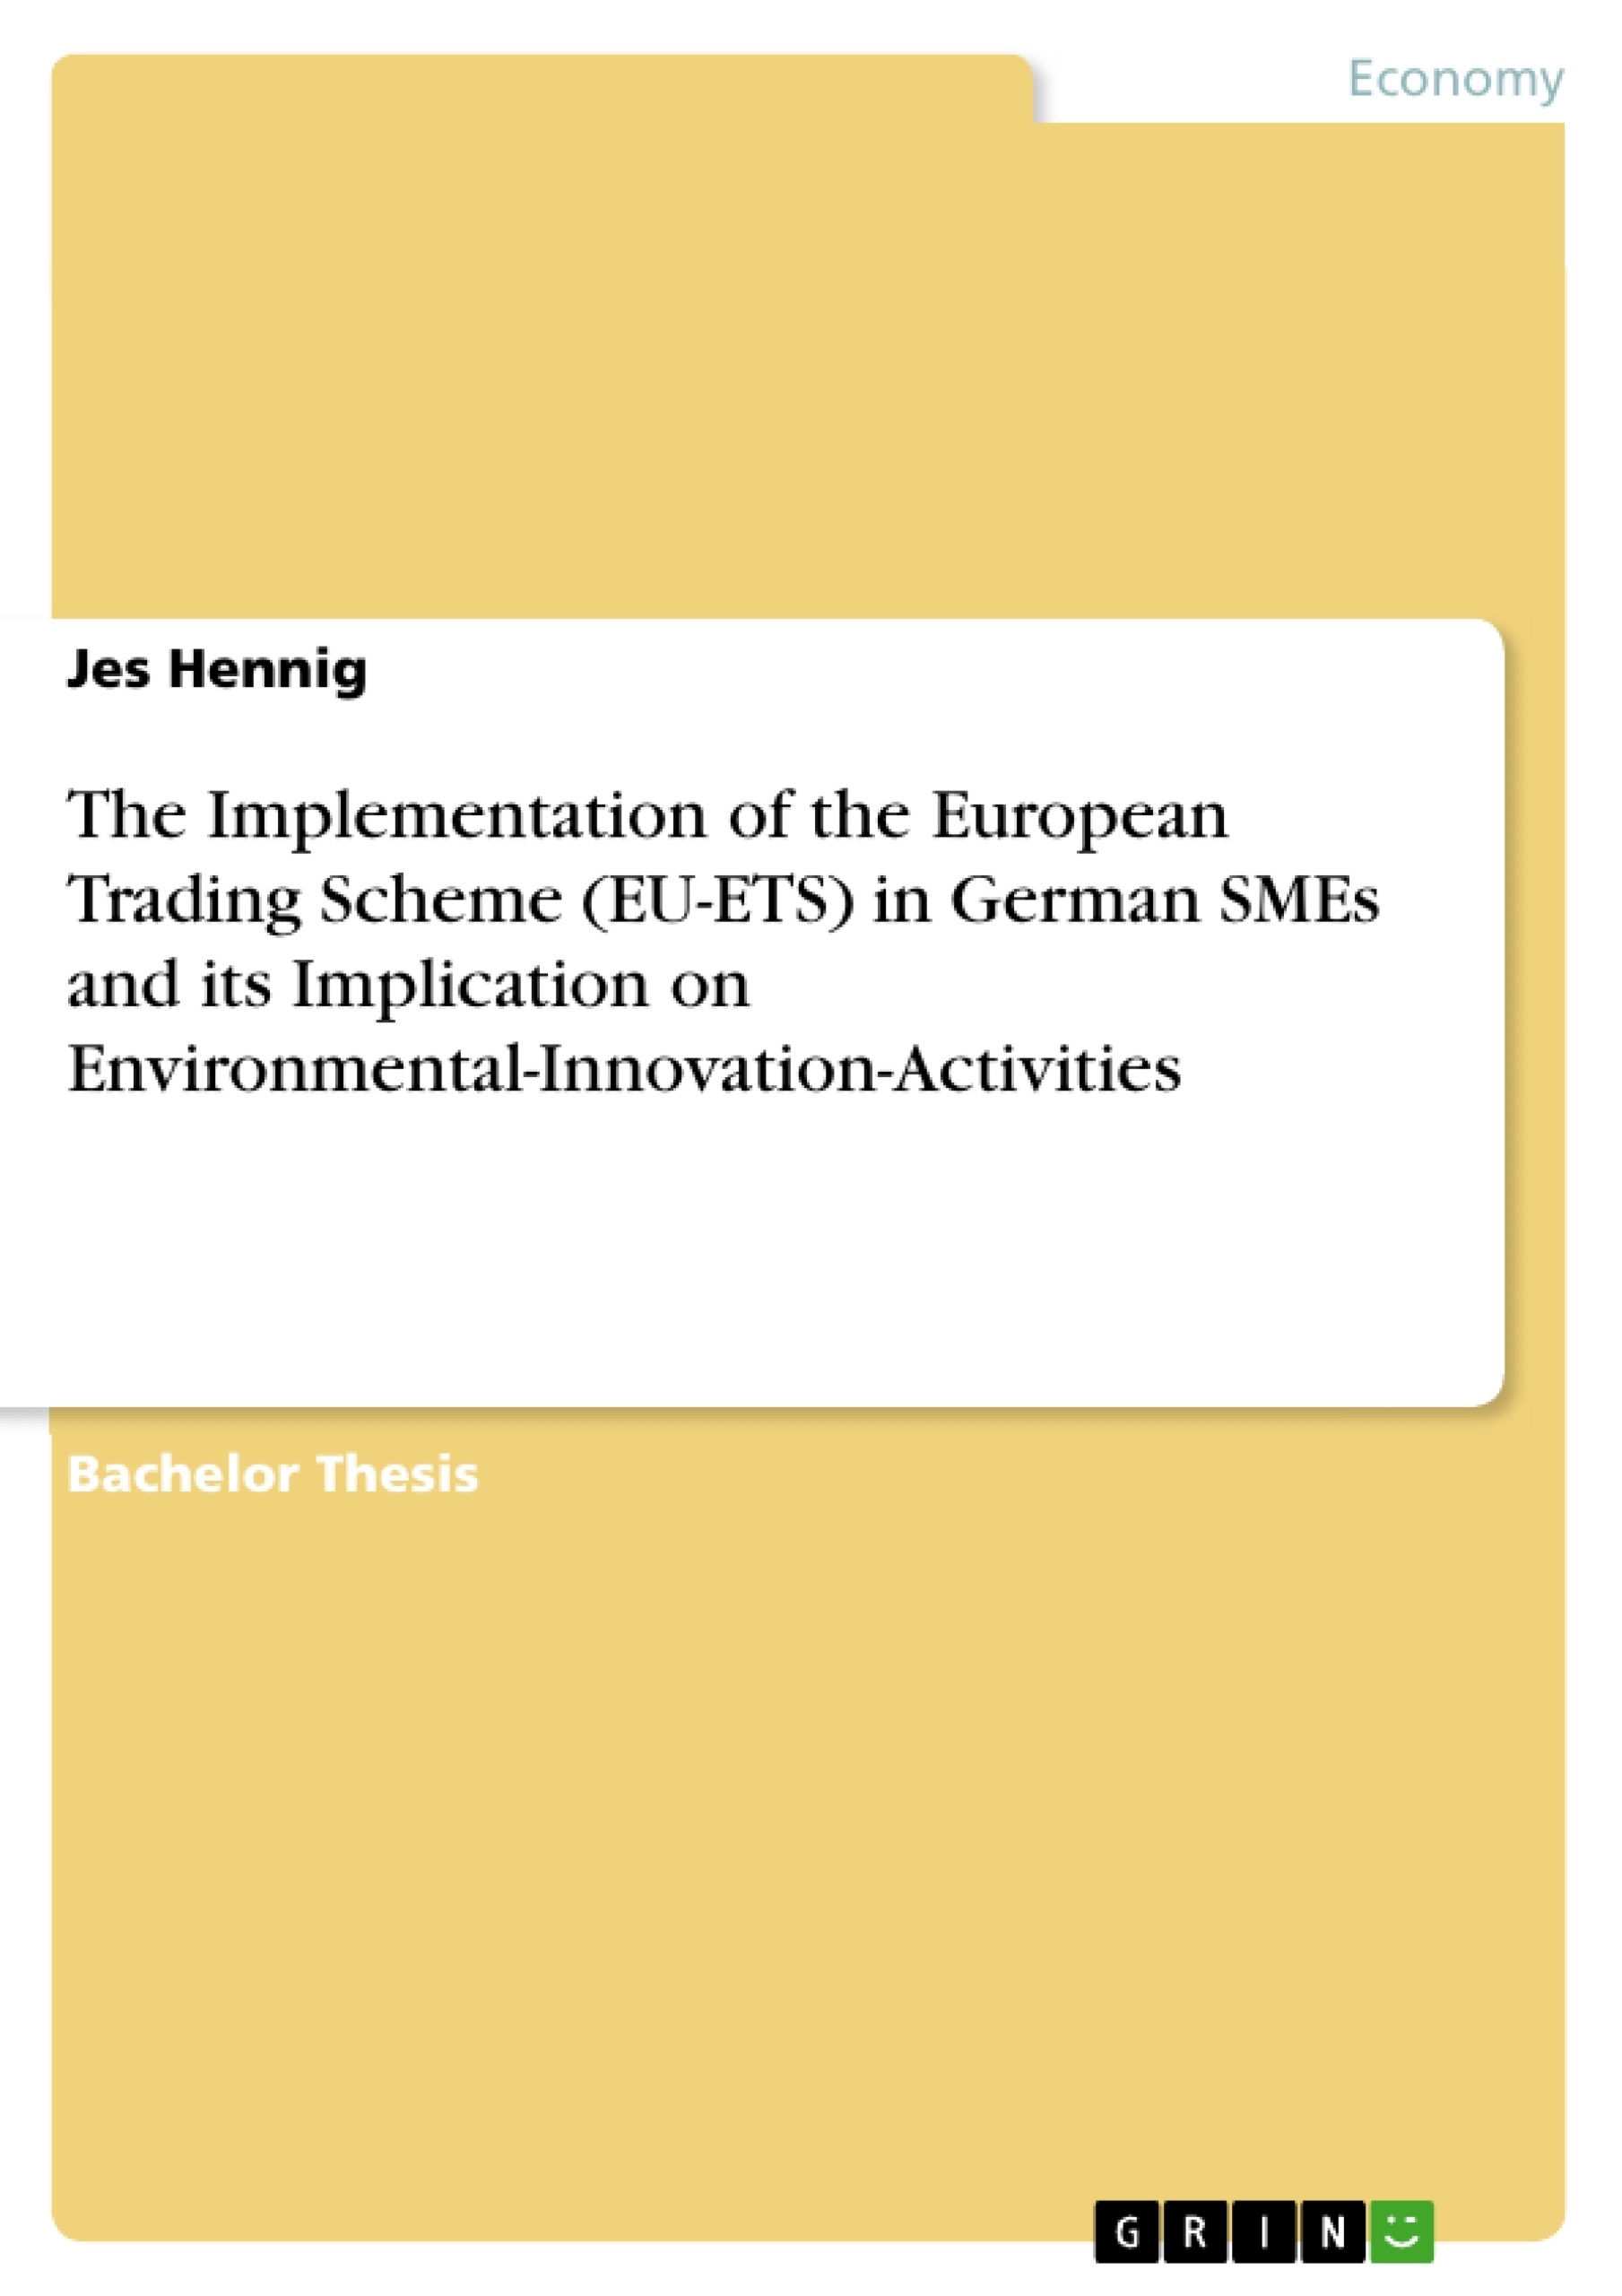 Title: The Implementation of the European Trading Scheme (EU-ETS) in German SMEs  and its Implication on Environmental-Innovation-Activities